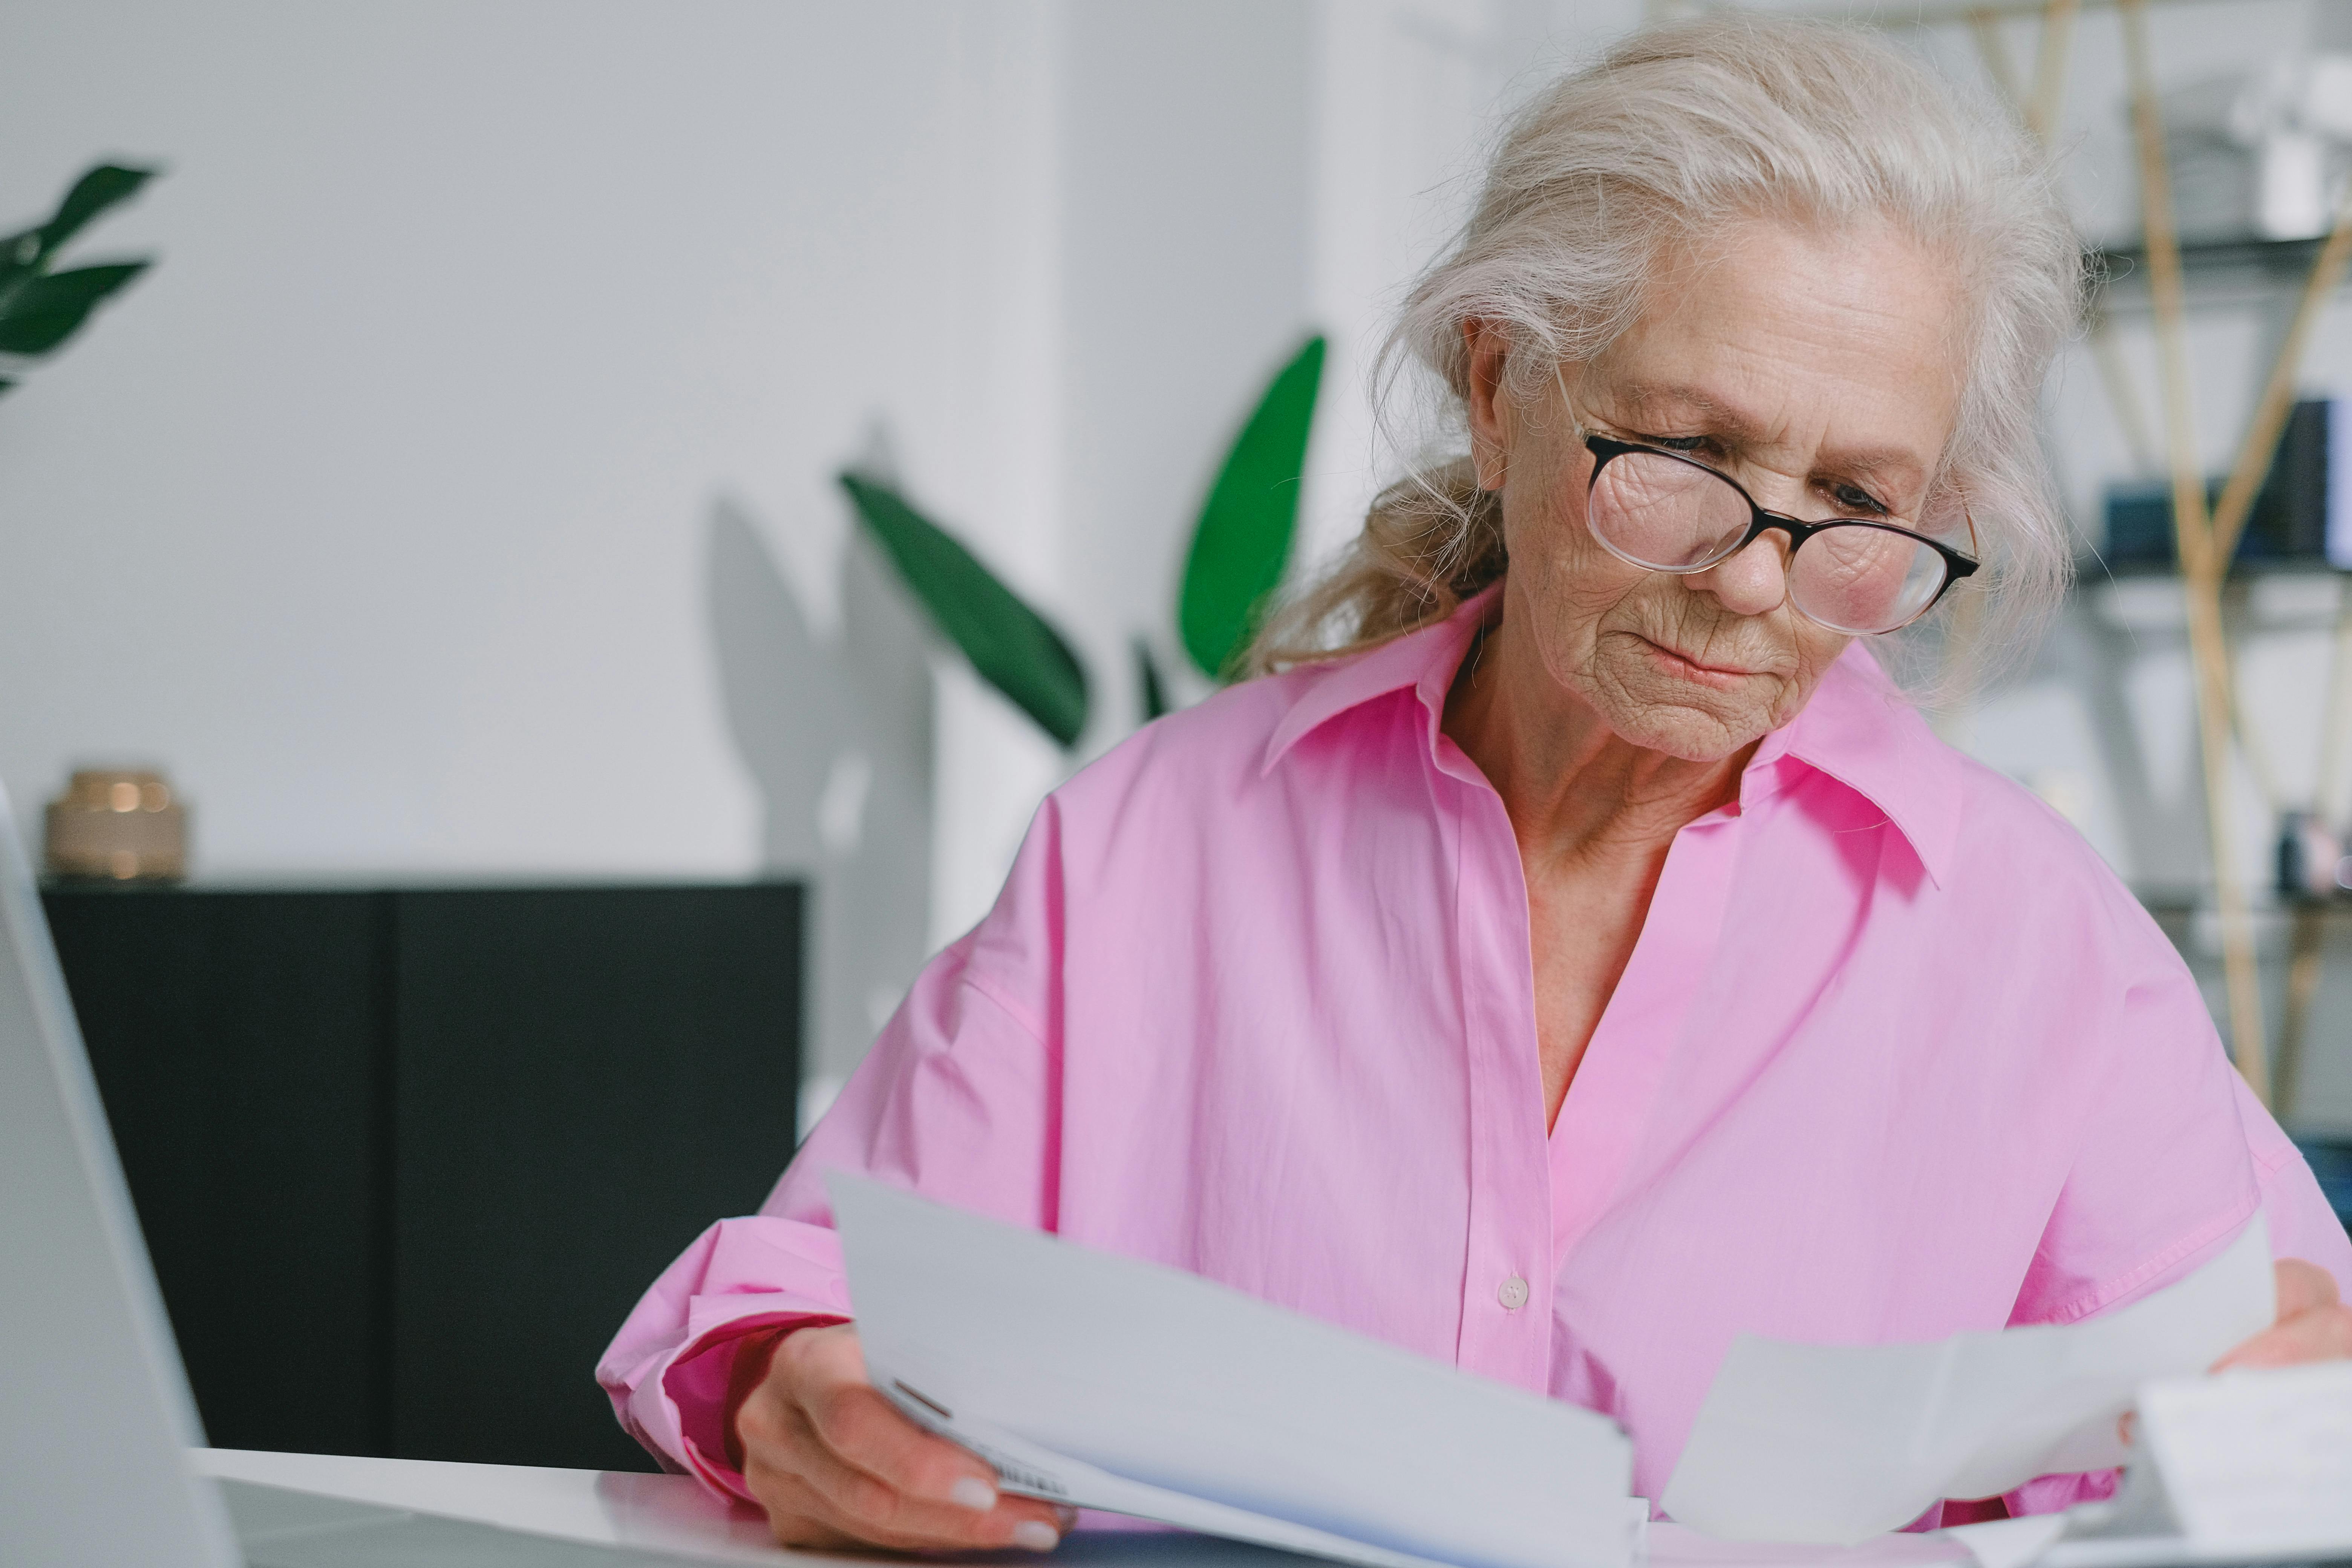 A woman wearing eyeglasses while reading a document | Source: Pexels